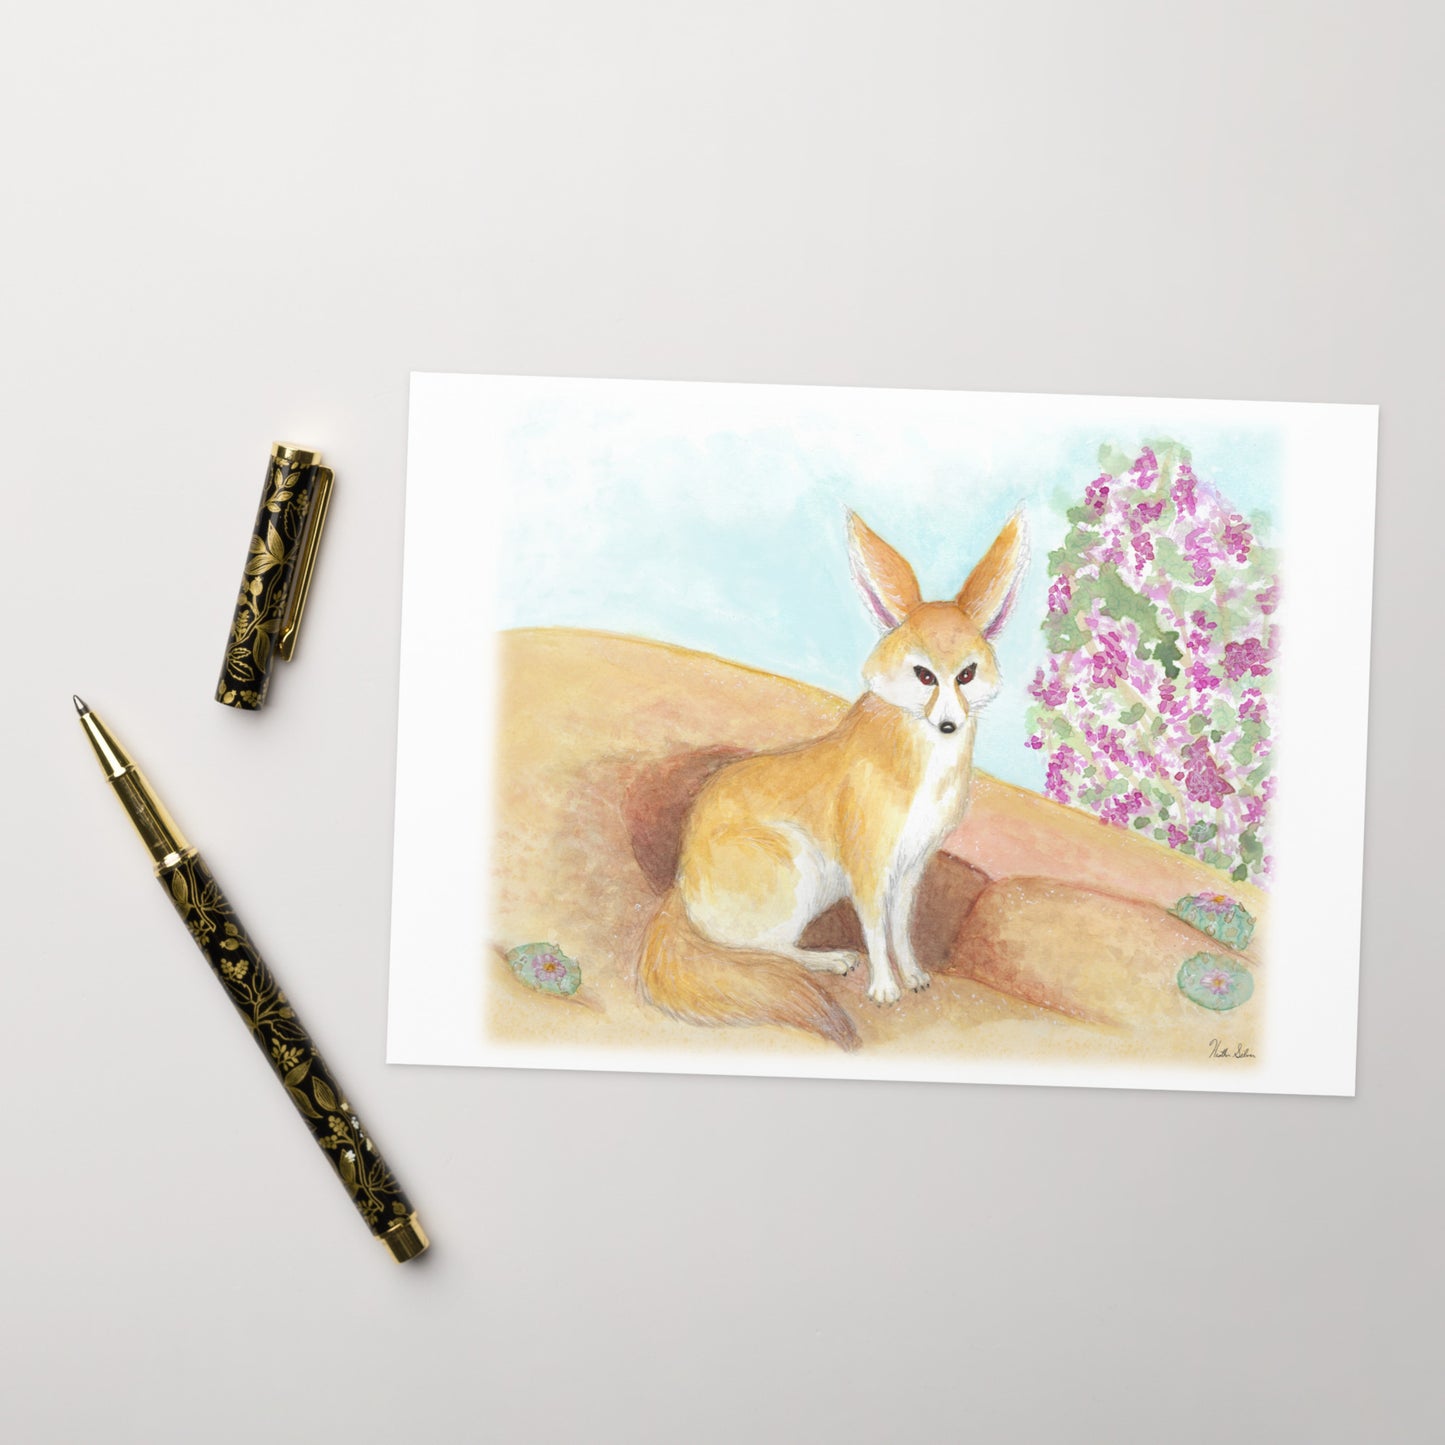 Pack of ten 5 x 7 inch greeting cards. Features watercolor print of fennec fox near it's den in the desert by a jacaranda tree on the front. Inside is blank. Made of coated paperboard. Comes with ten envelopes. Shown on tabletop by ballpoint pen.